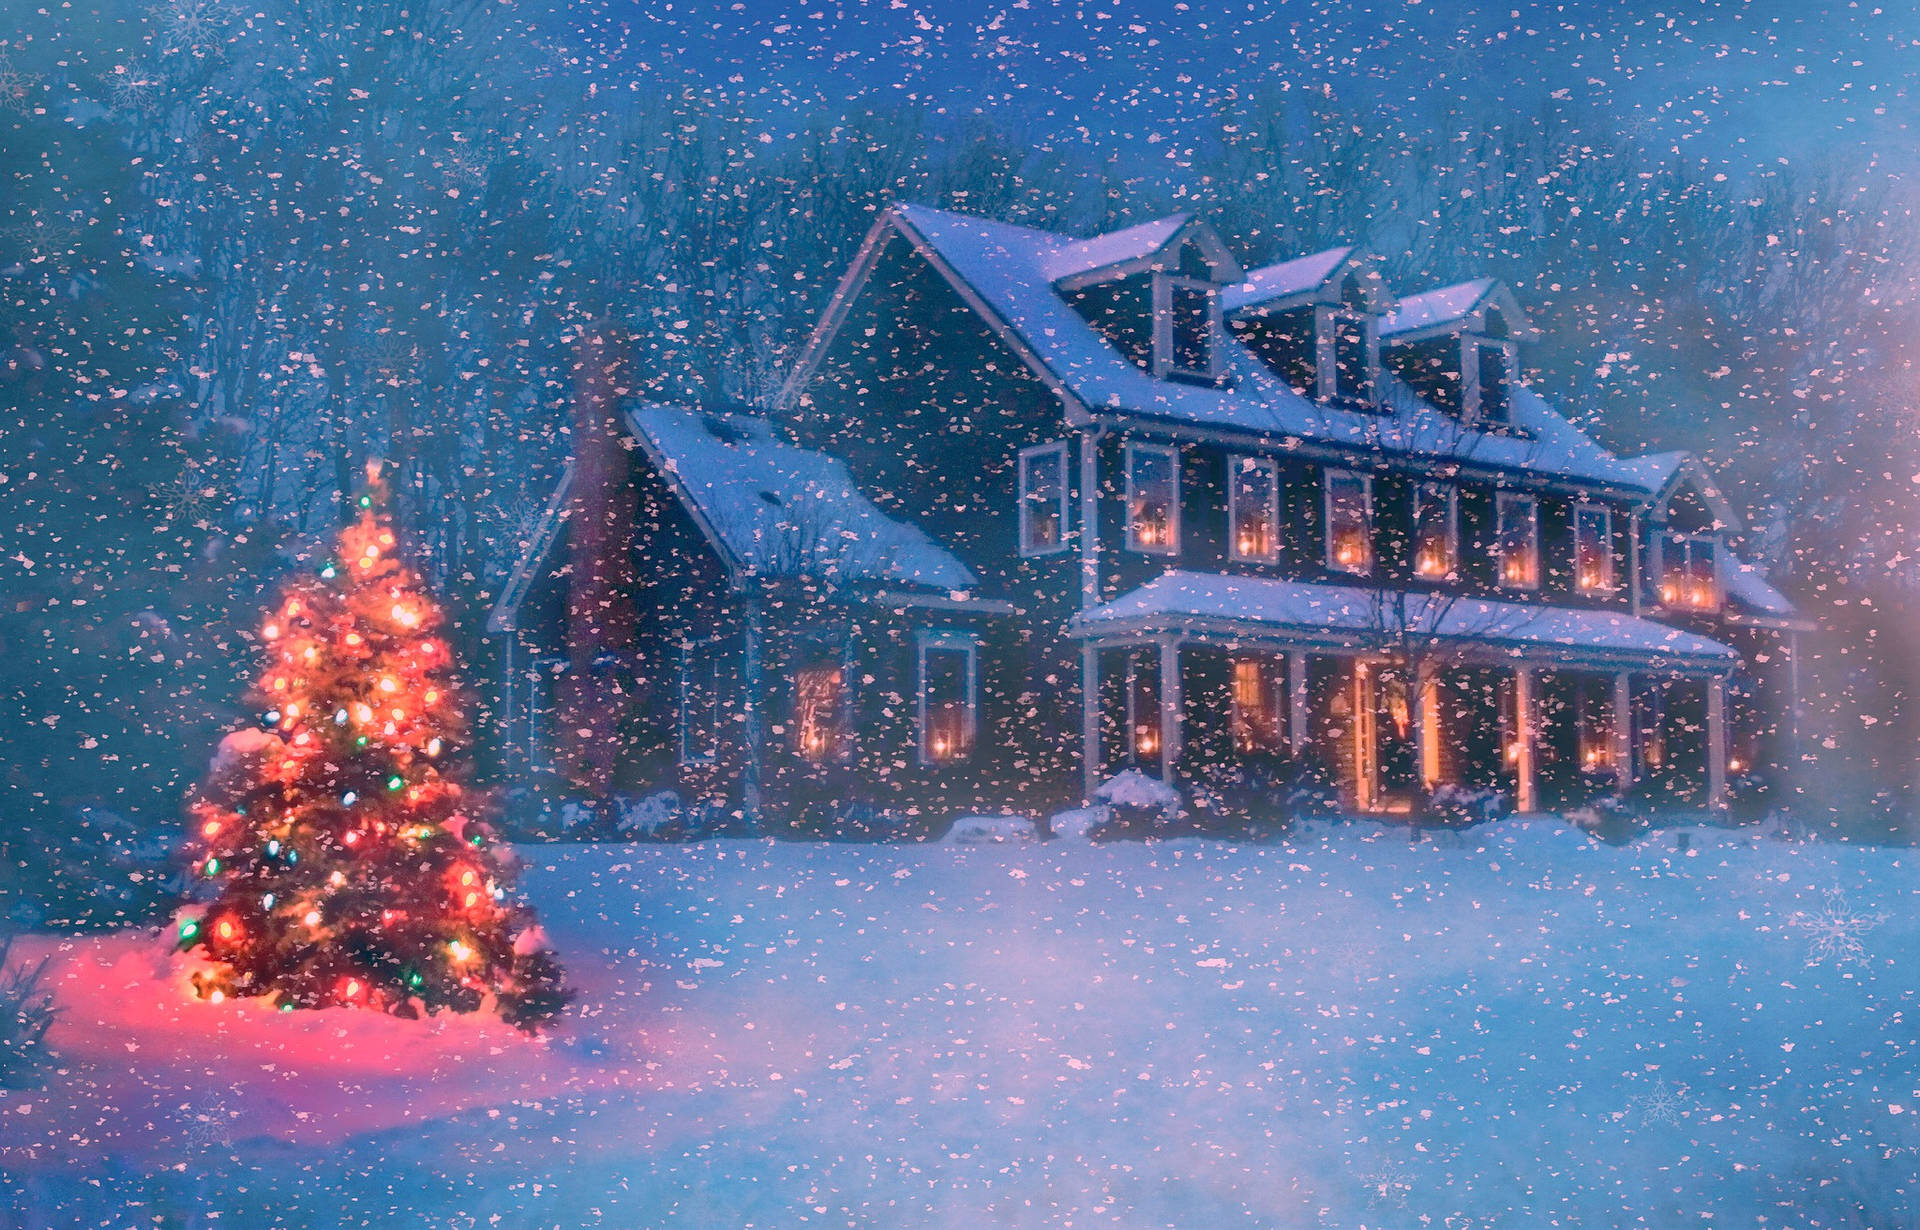 Download Winter Christmas Blizzard House Wallpaper